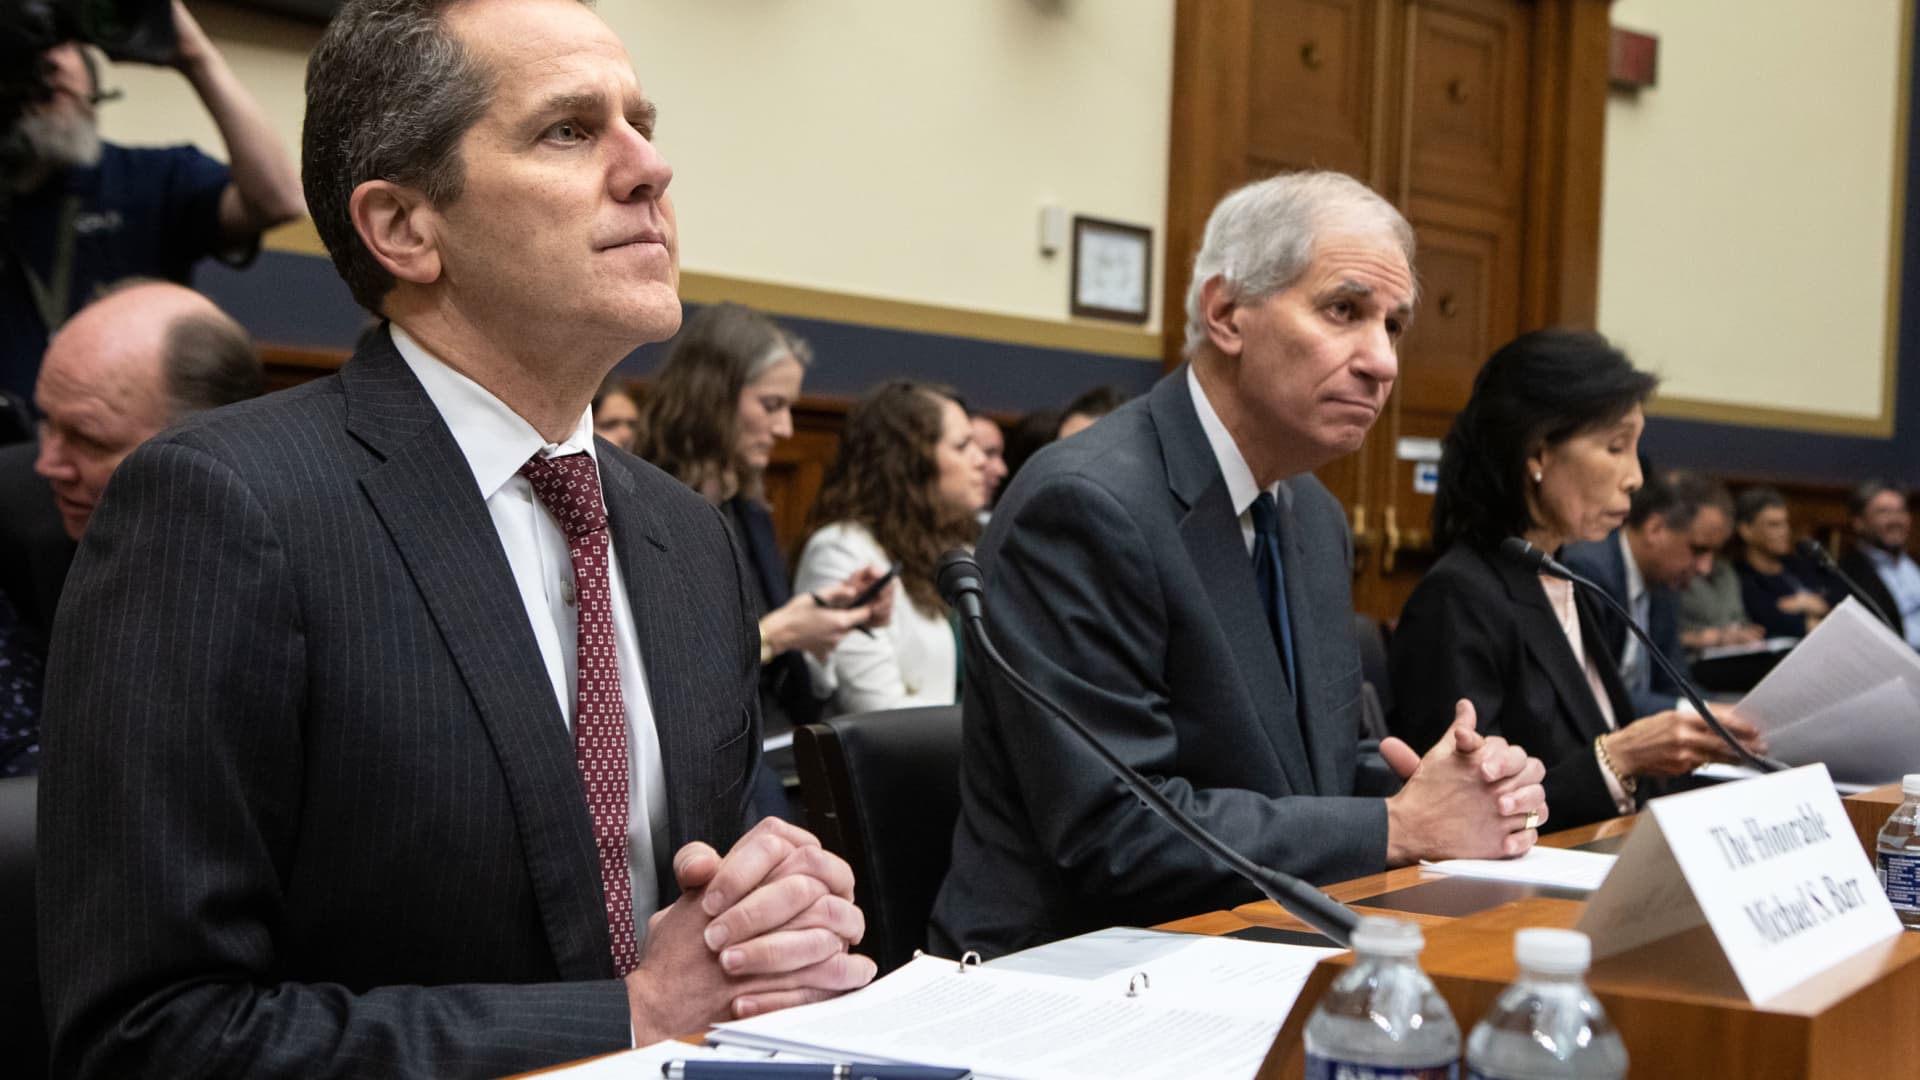 House lawmakers tear into top bank regulators in second hearing this week on SVB collapse